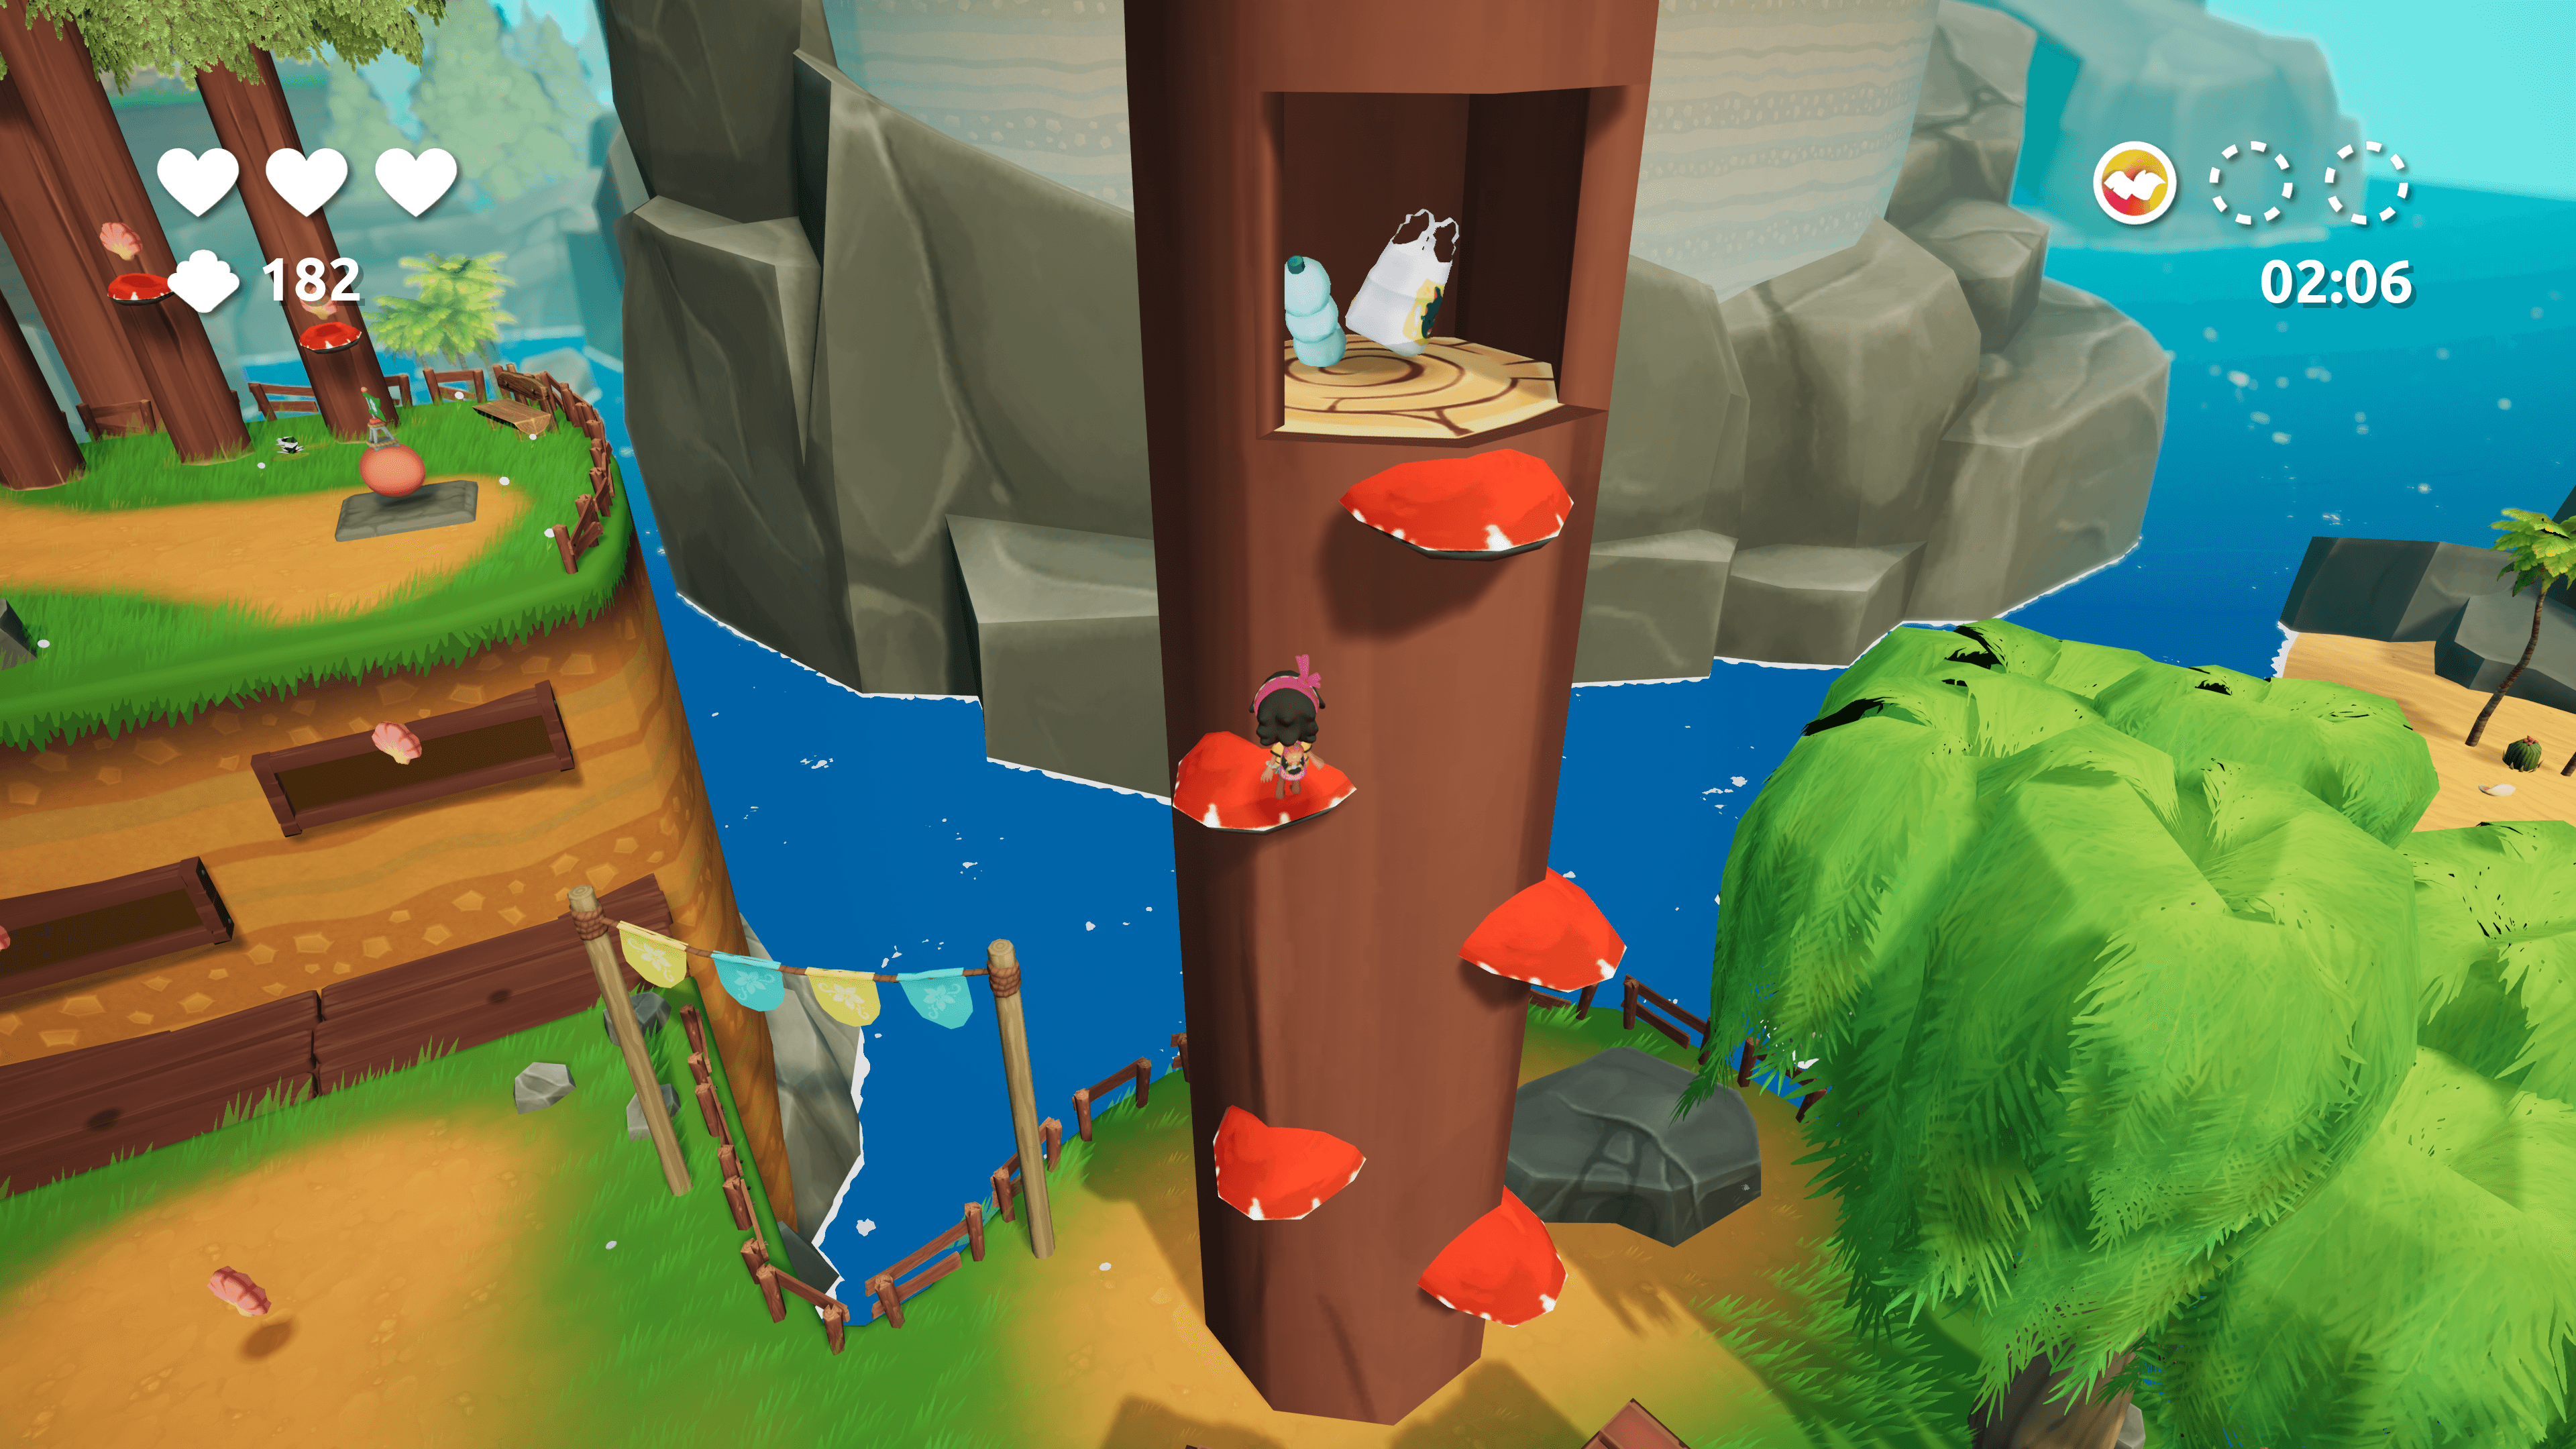 Screenshot shows Koa standing atop a log, with mushroom ledges forming a jumping puzzle from base to top.